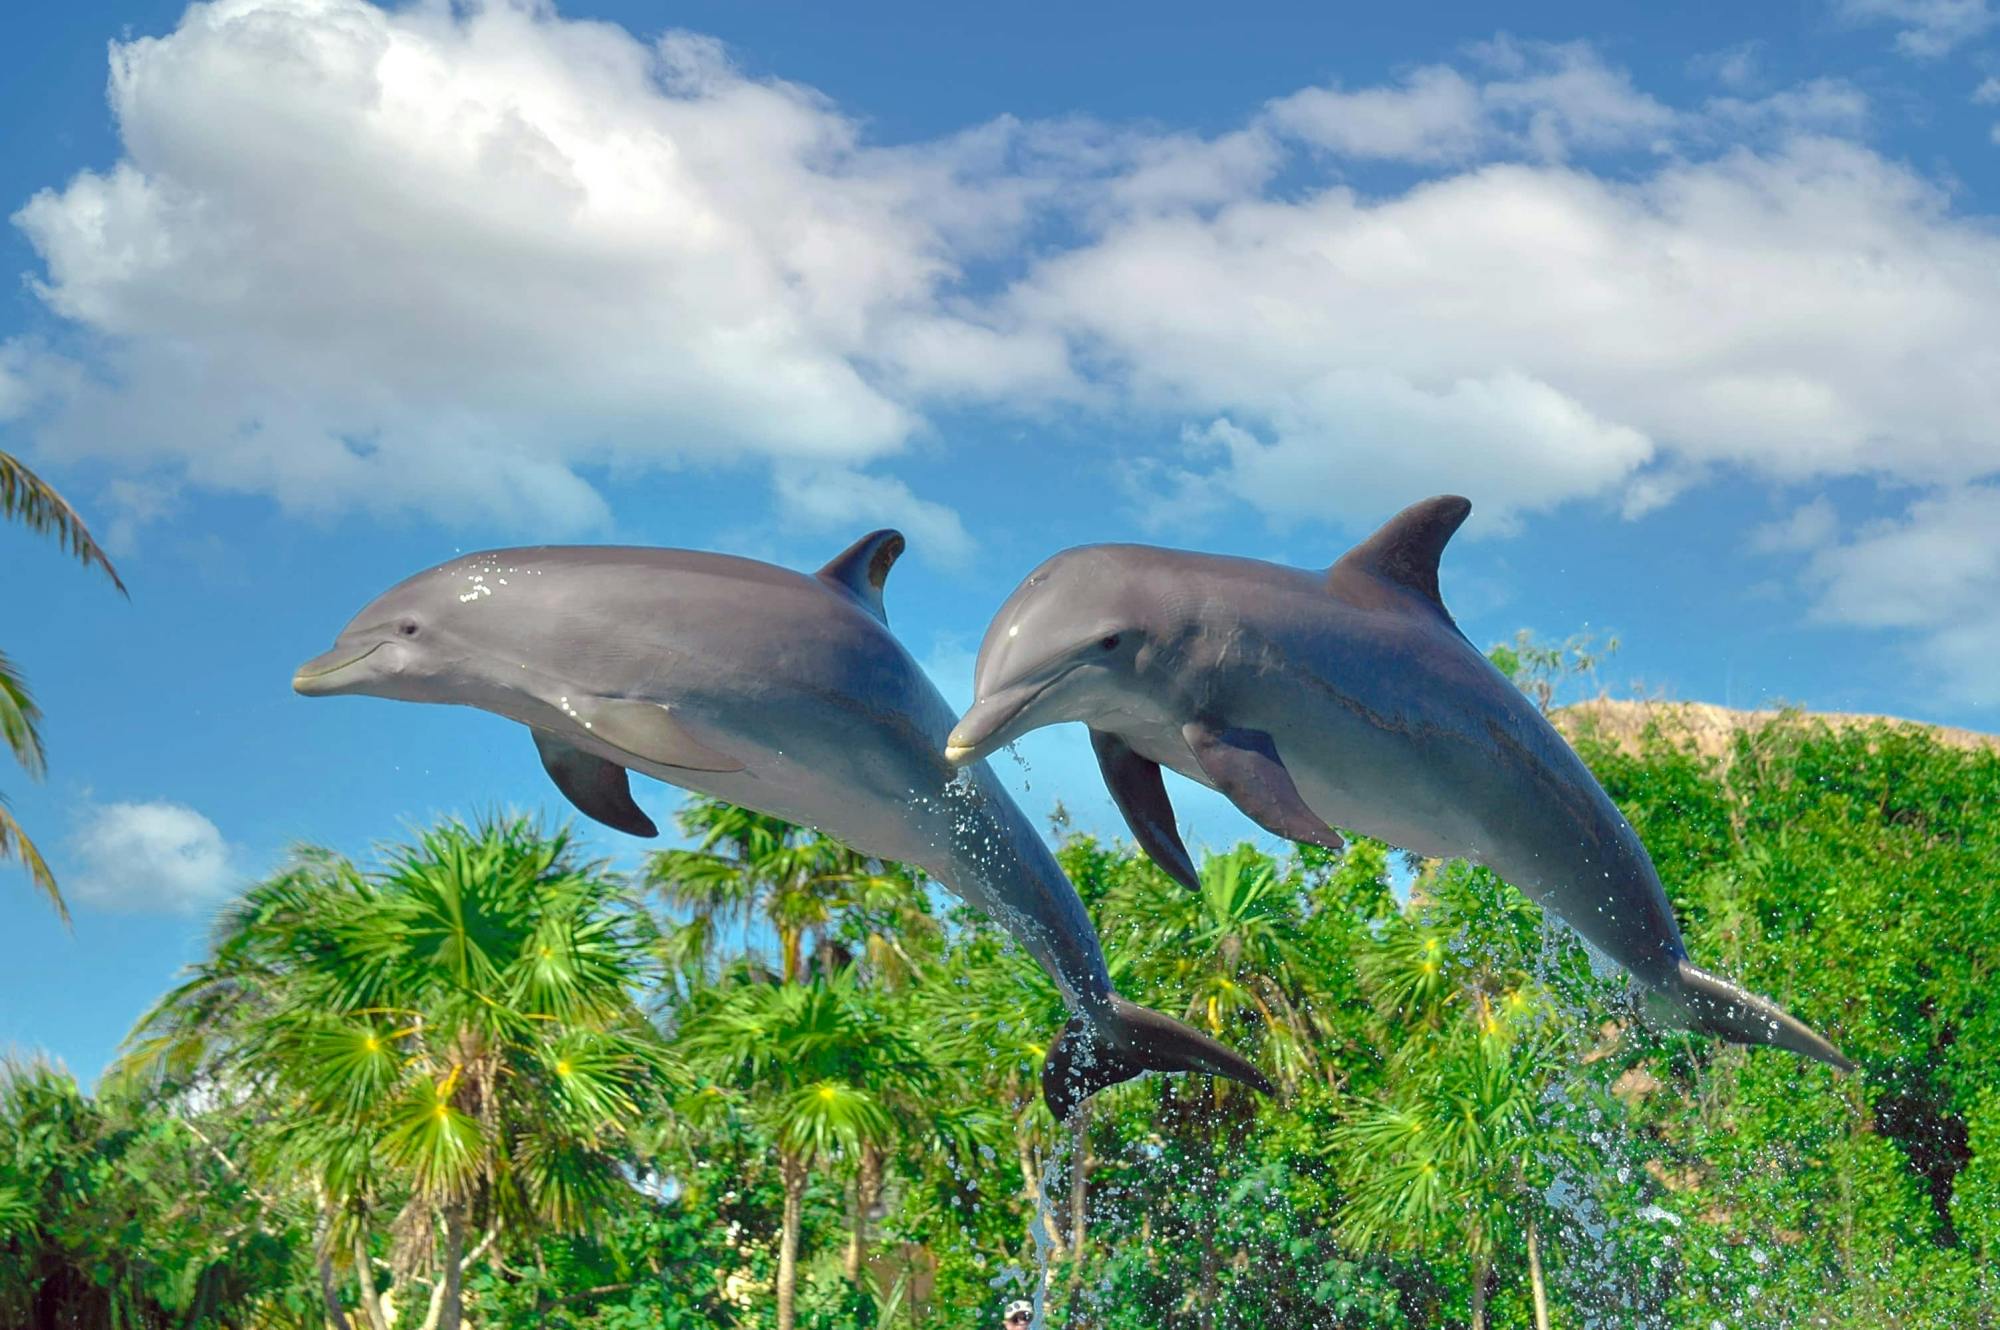 Delphinus Dolphin Experiences at Playa Mujeres